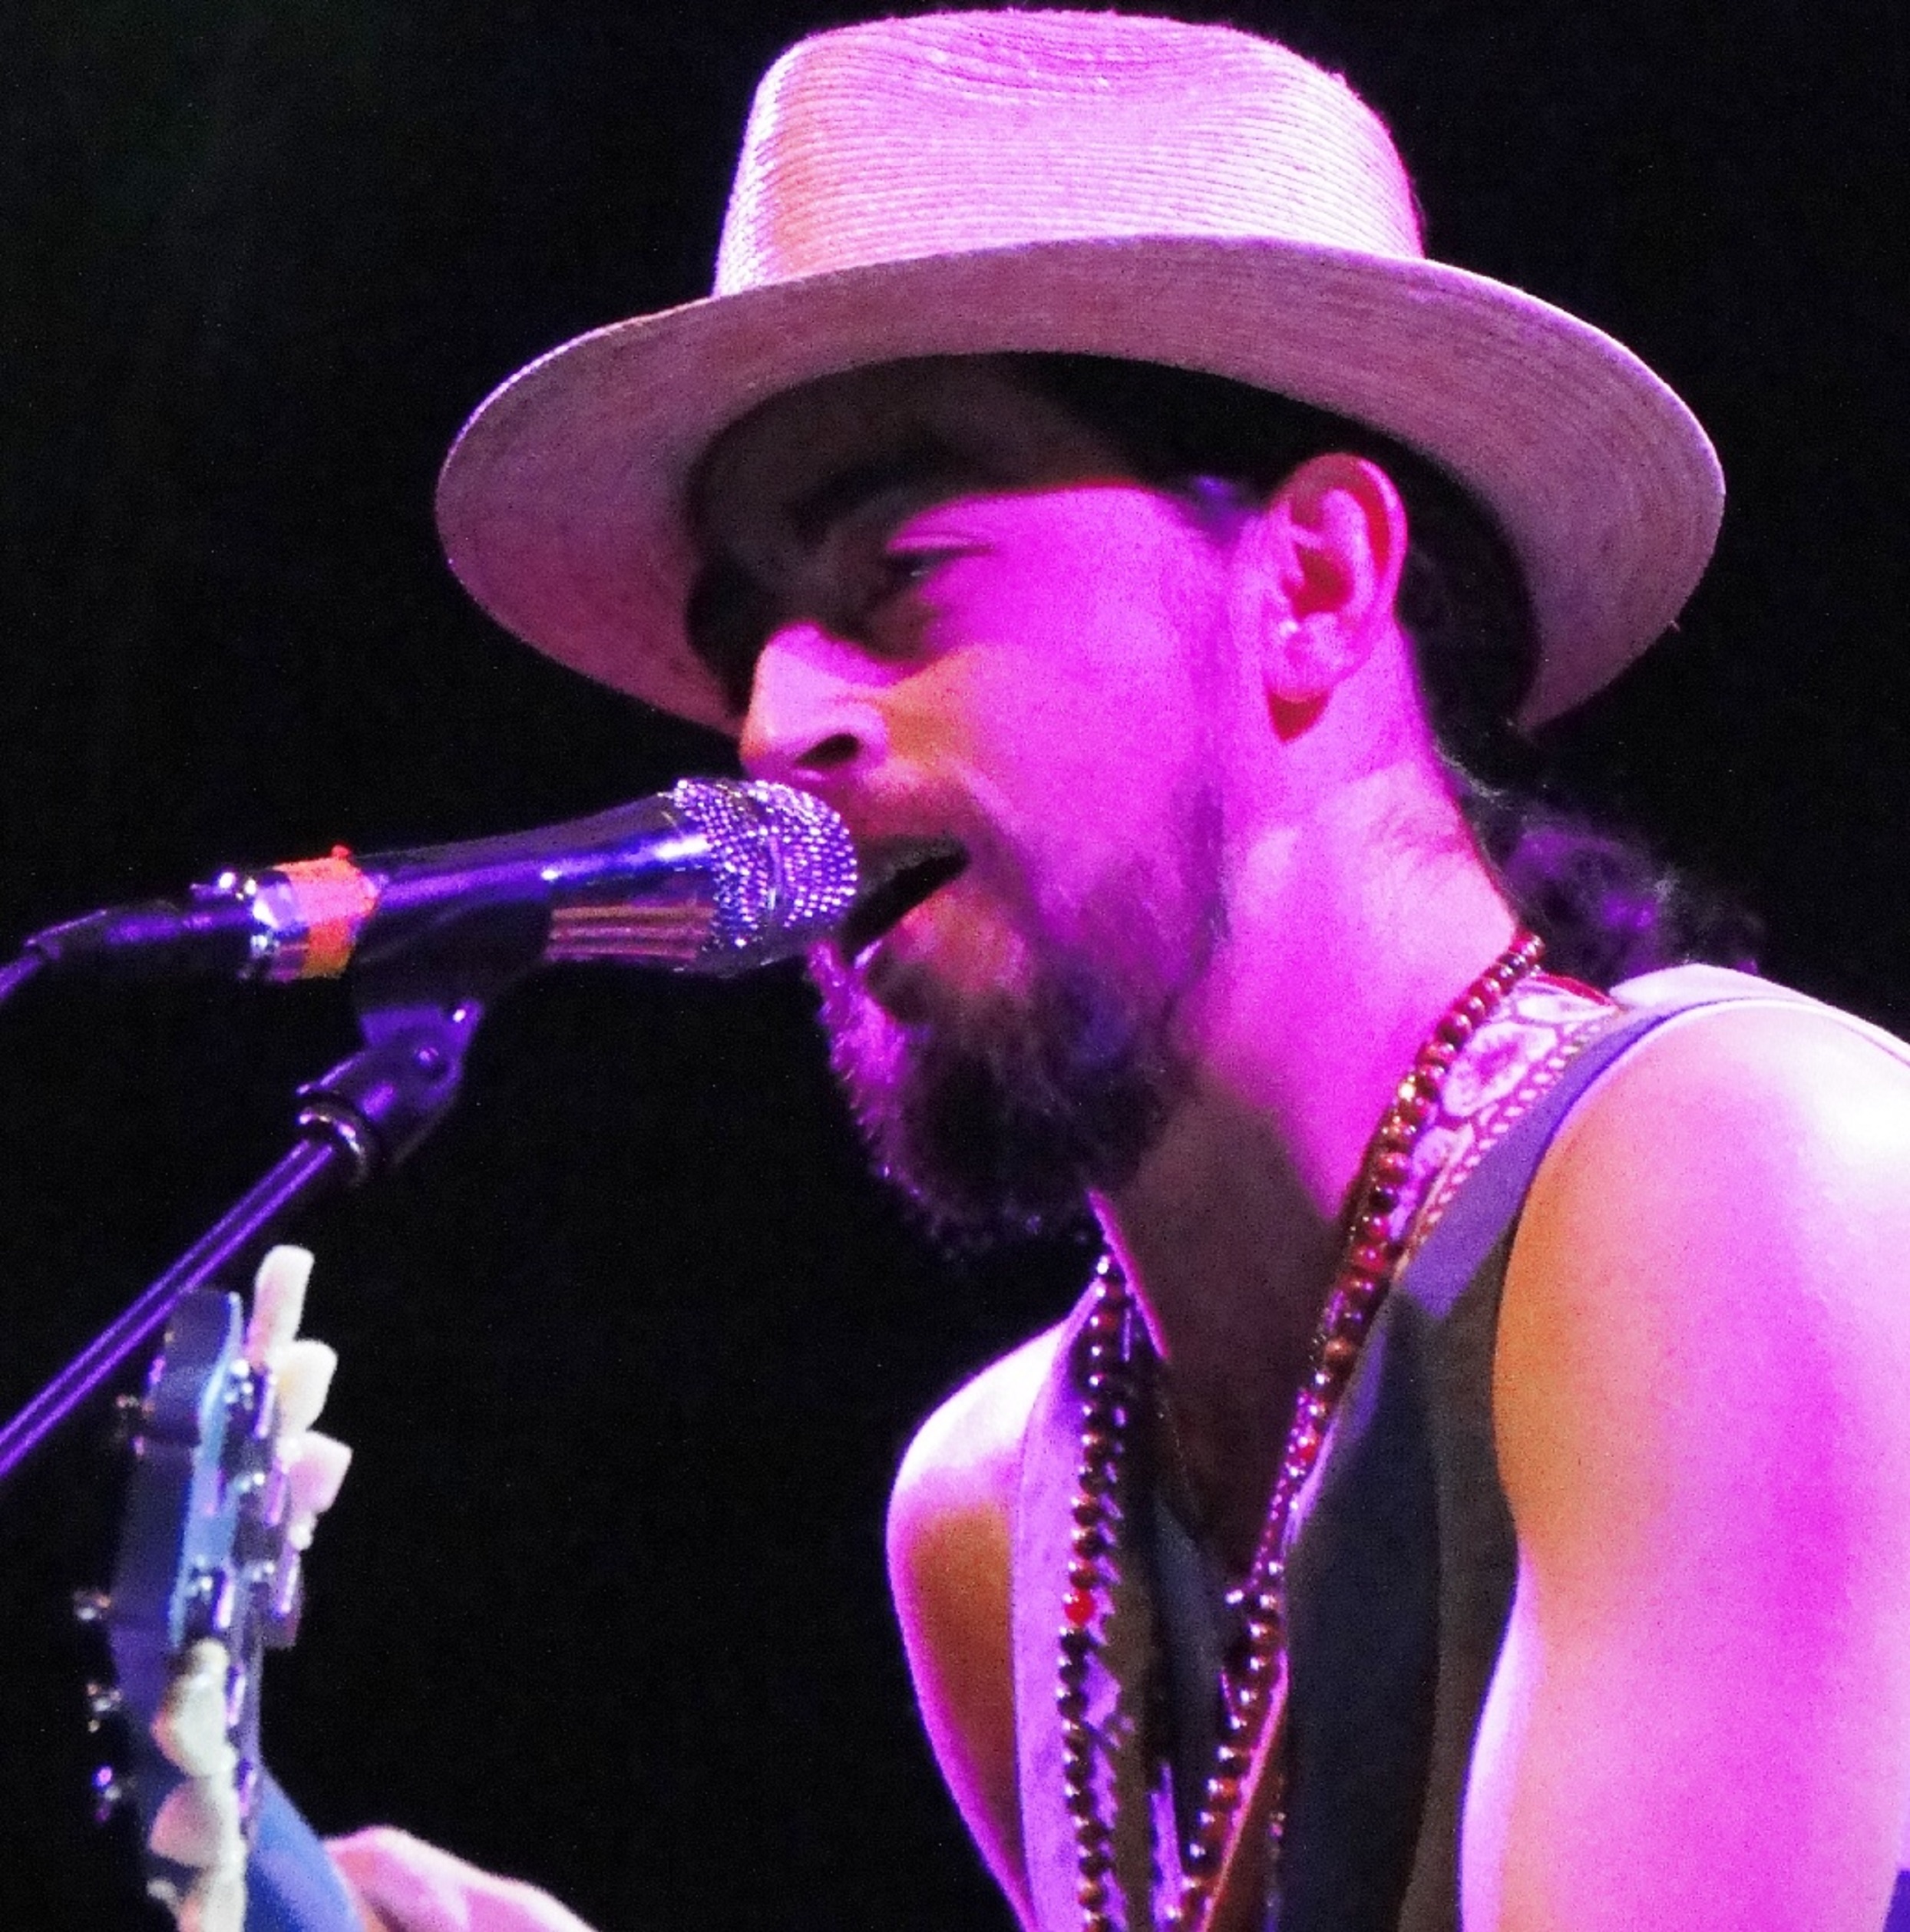 Greener on the Other Side: Jackie Greene Shows Freedom, Experimentation on Stage